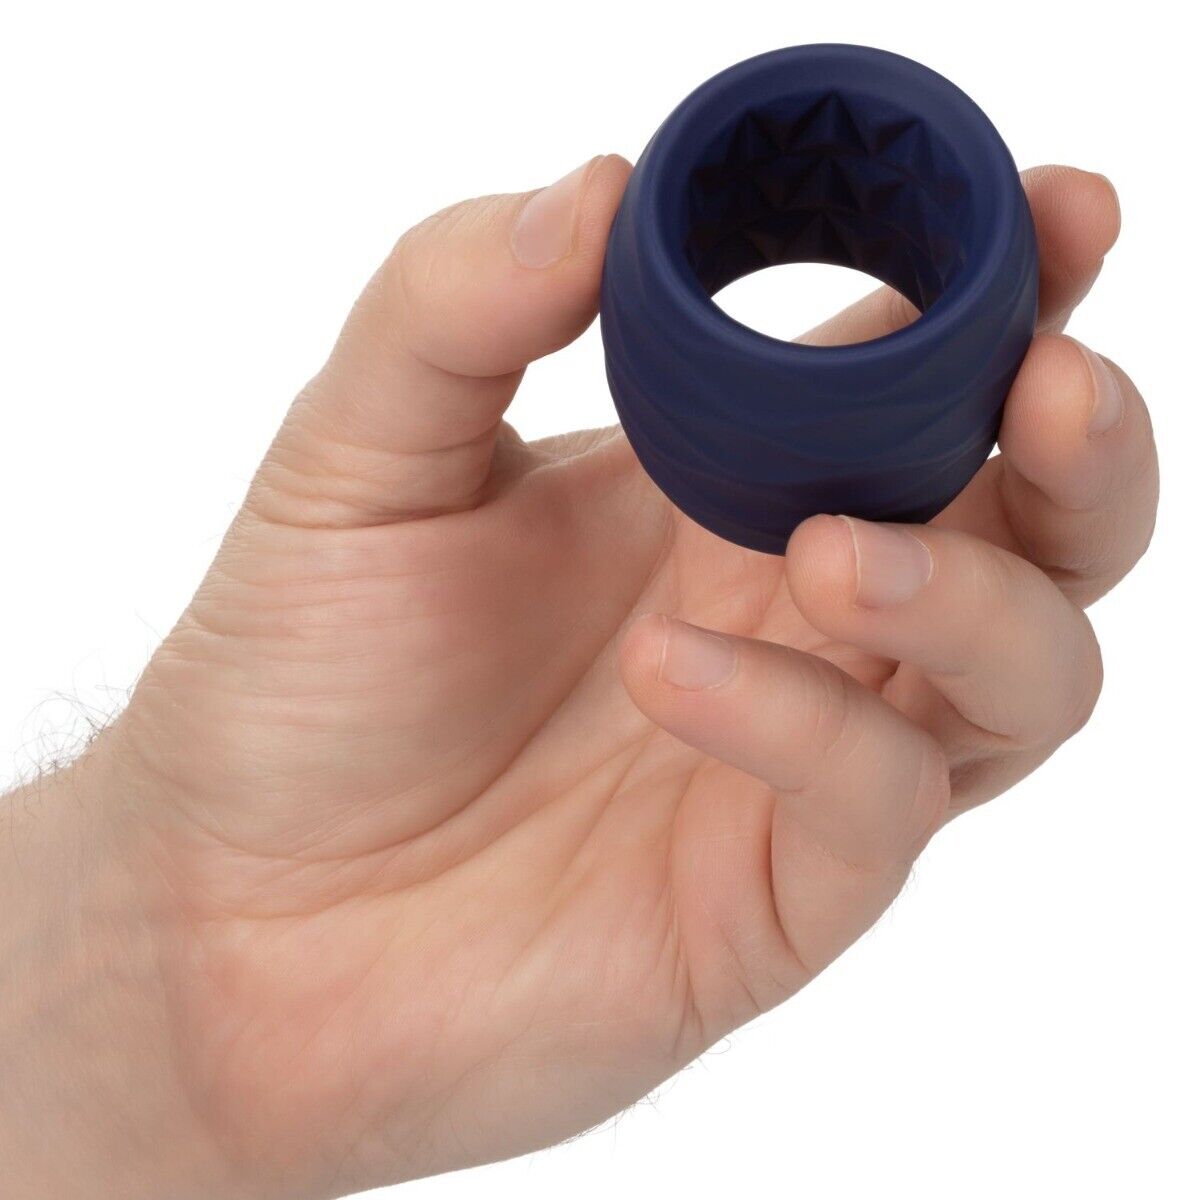 Soft Reversible Silicone Penis Cock Ring Prolong Delay Sex Toys for Men Couples